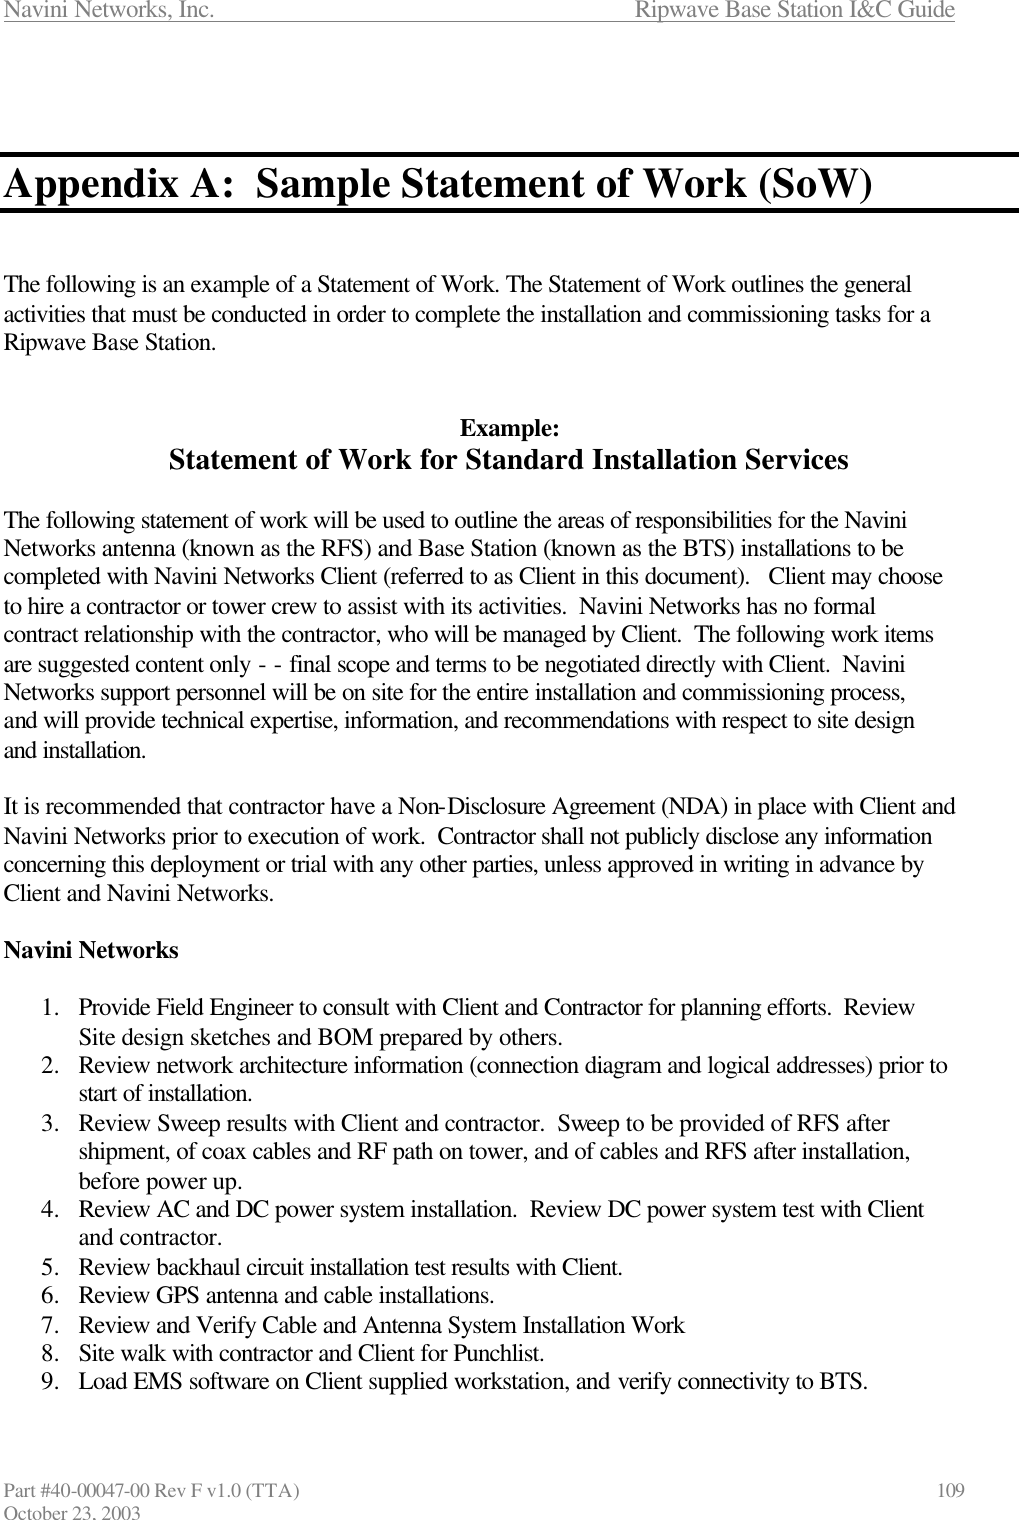 Navini Networks, Inc.                      Ripwave Base Station I&amp;C Guide Part #40-00047-00 Rev F v1.0 (TTA)                            109 October 23, 2003    Appendix A:  Sample Statement of Work (SoW)   The following is an example of a Statement of Work. The Statement of Work outlines the general activities that must be conducted in order to complete the installation and commissioning tasks for a Ripwave Base Station.   Example: Statement of Work for Standard Installation Services  The following statement of work will be used to outline the areas of responsibilities for the Navini Networks antenna (known as the RFS) and Base Station (known as the BTS) installations to be completed with Navini Networks Client (referred to as Client in this document).   Client may choose to hire a contractor or tower crew to assist with its activities.  Navini Networks has no formal contract relationship with the contractor, who will be managed by Client.  The following work items are suggested content only - - final scope and terms to be negotiated directly with Client.  Navini  Networks support personnel will be on site for the entire installation and commissioning process, and will provide technical expertise, information, and recommendations with respect to site design and installation.  It is recommended that contractor have a Non-Disclosure Agreement (NDA) in place with Client and Navini Networks prior to execution of work.  Contractor shall not publicly disclose any information concerning this deployment or trial with any other parties, unless approved in writing in advance by Client and Navini Networks.  Navini Networks    1.  Provide Field Engineer to consult with Client and Contractor for planning efforts.  Review Site design sketches and BOM prepared by others. 2.  Review network architecture information (connection diagram and logical addresses) prior to start of installation. 3.  Review Sweep results with Client and contractor.  Sweep to be provided of RFS after shipment, of coax cables and RF path on tower, and of cables and RFS after installation, before power up. 4.  Review AC and DC power system installation.  Review DC power system test with Client and contractor. 5.  Review backhaul circuit installation test results with Client. 6.  Review GPS antenna and cable installations. 7.  Review and Verify Cable and Antenna System Installation Work 8.  Site walk with contractor and Client for Punchlist. 9.  Load EMS software on Client supplied workstation, and verify connectivity to BTS. 